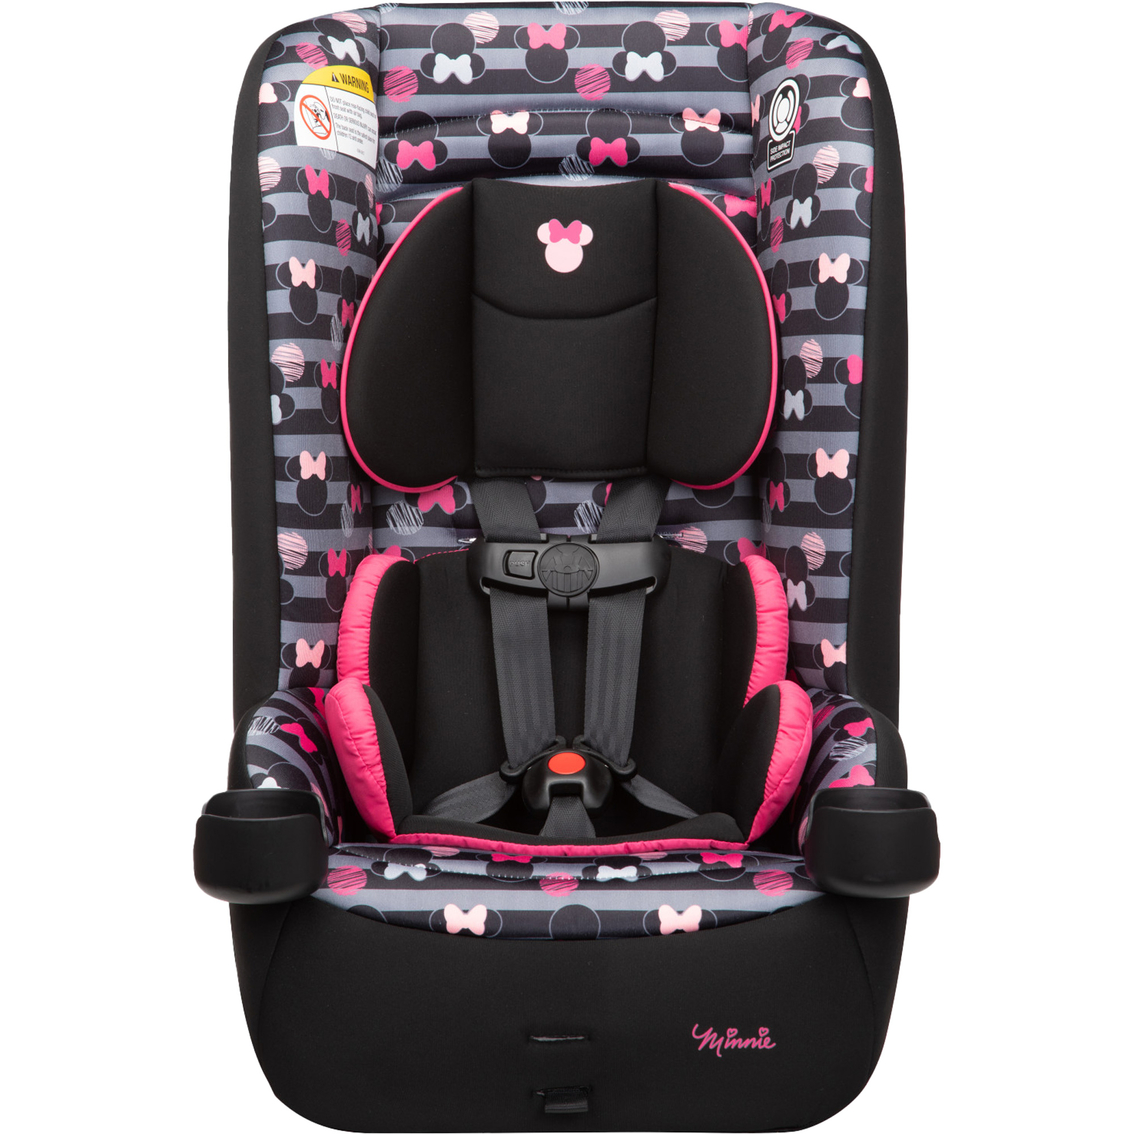 Disney Baby 2 in 1 Convertible Car Seat - Image 3 of 10